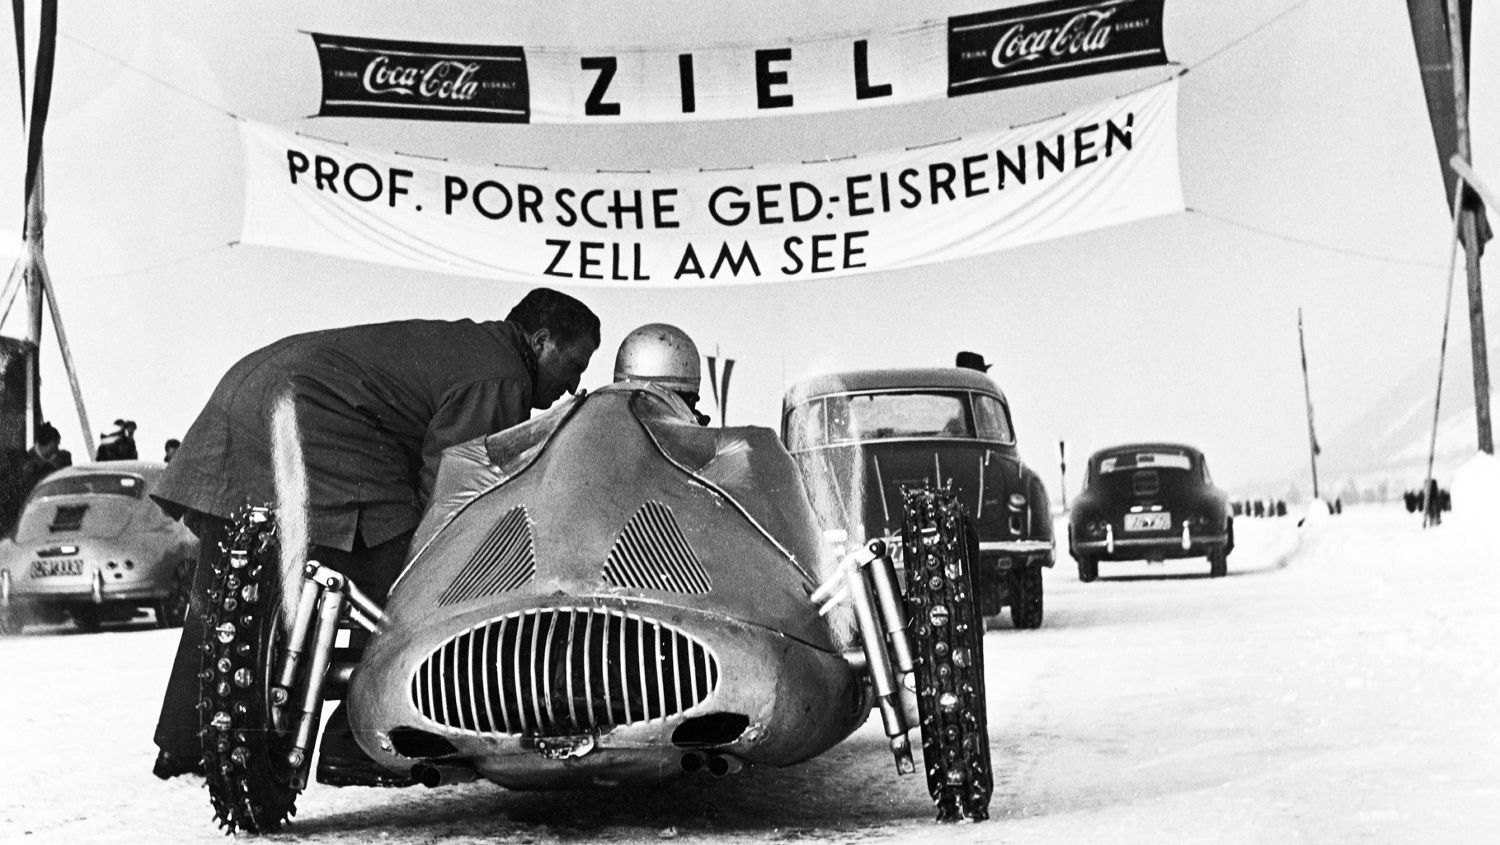 Ice Race, Zell am See, 1956